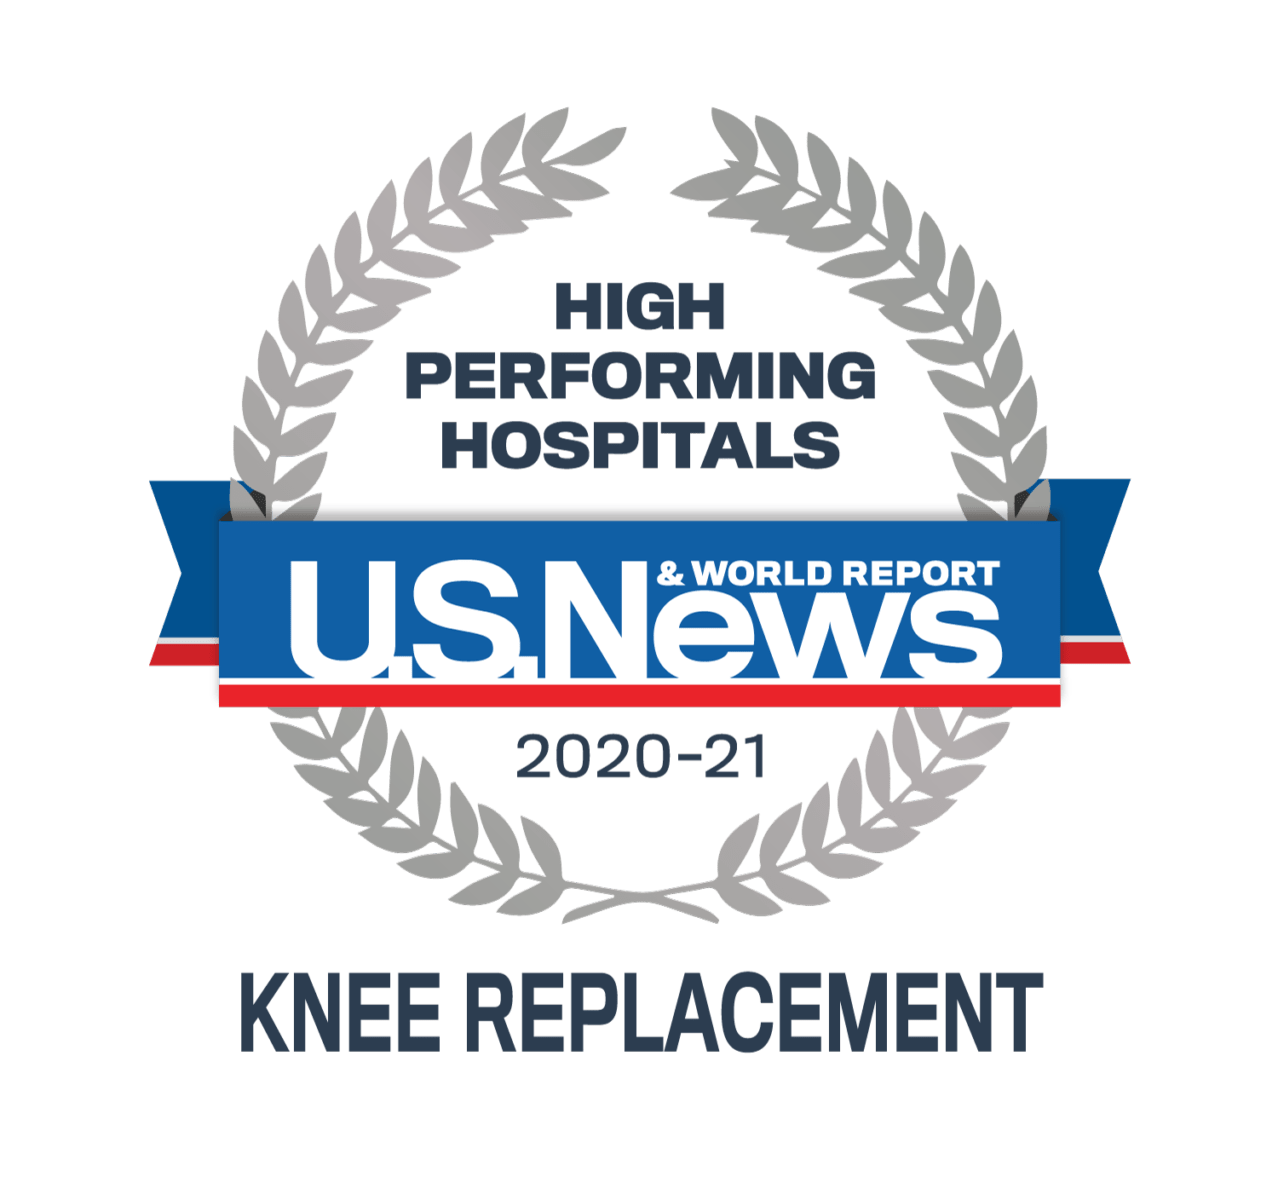 Memorial Hospital is listed as a High Performing Hospital in the U.S. News & World Report for Knee Replacement for 2020-2021.